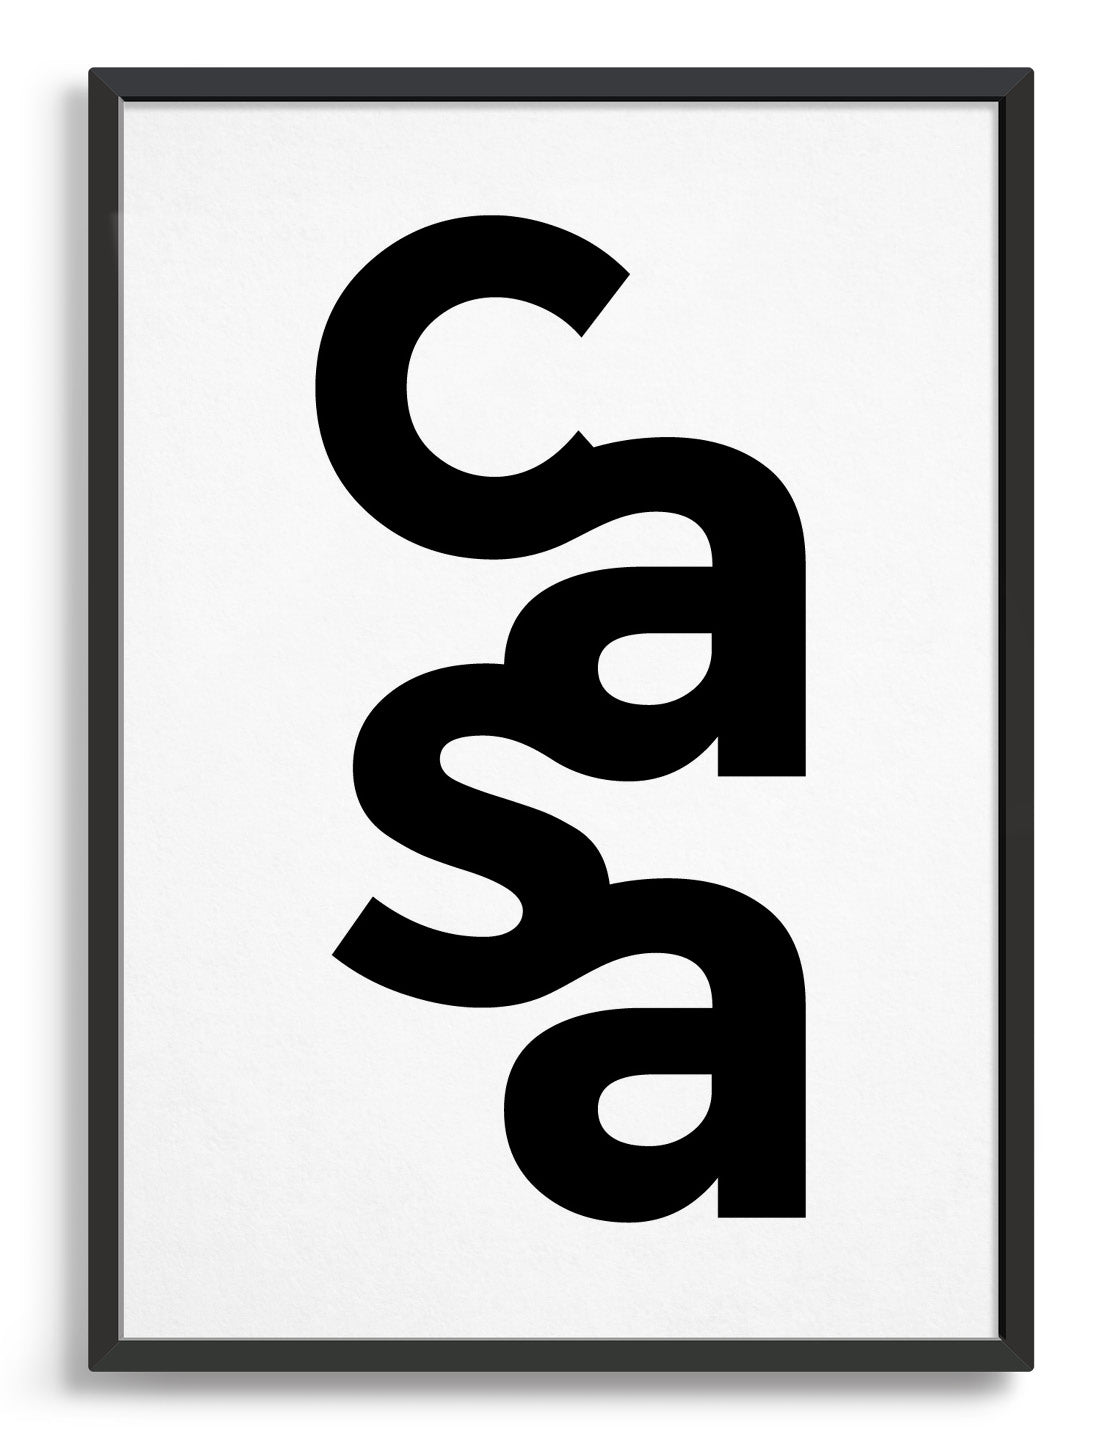 typography art print with casa in black against a white background